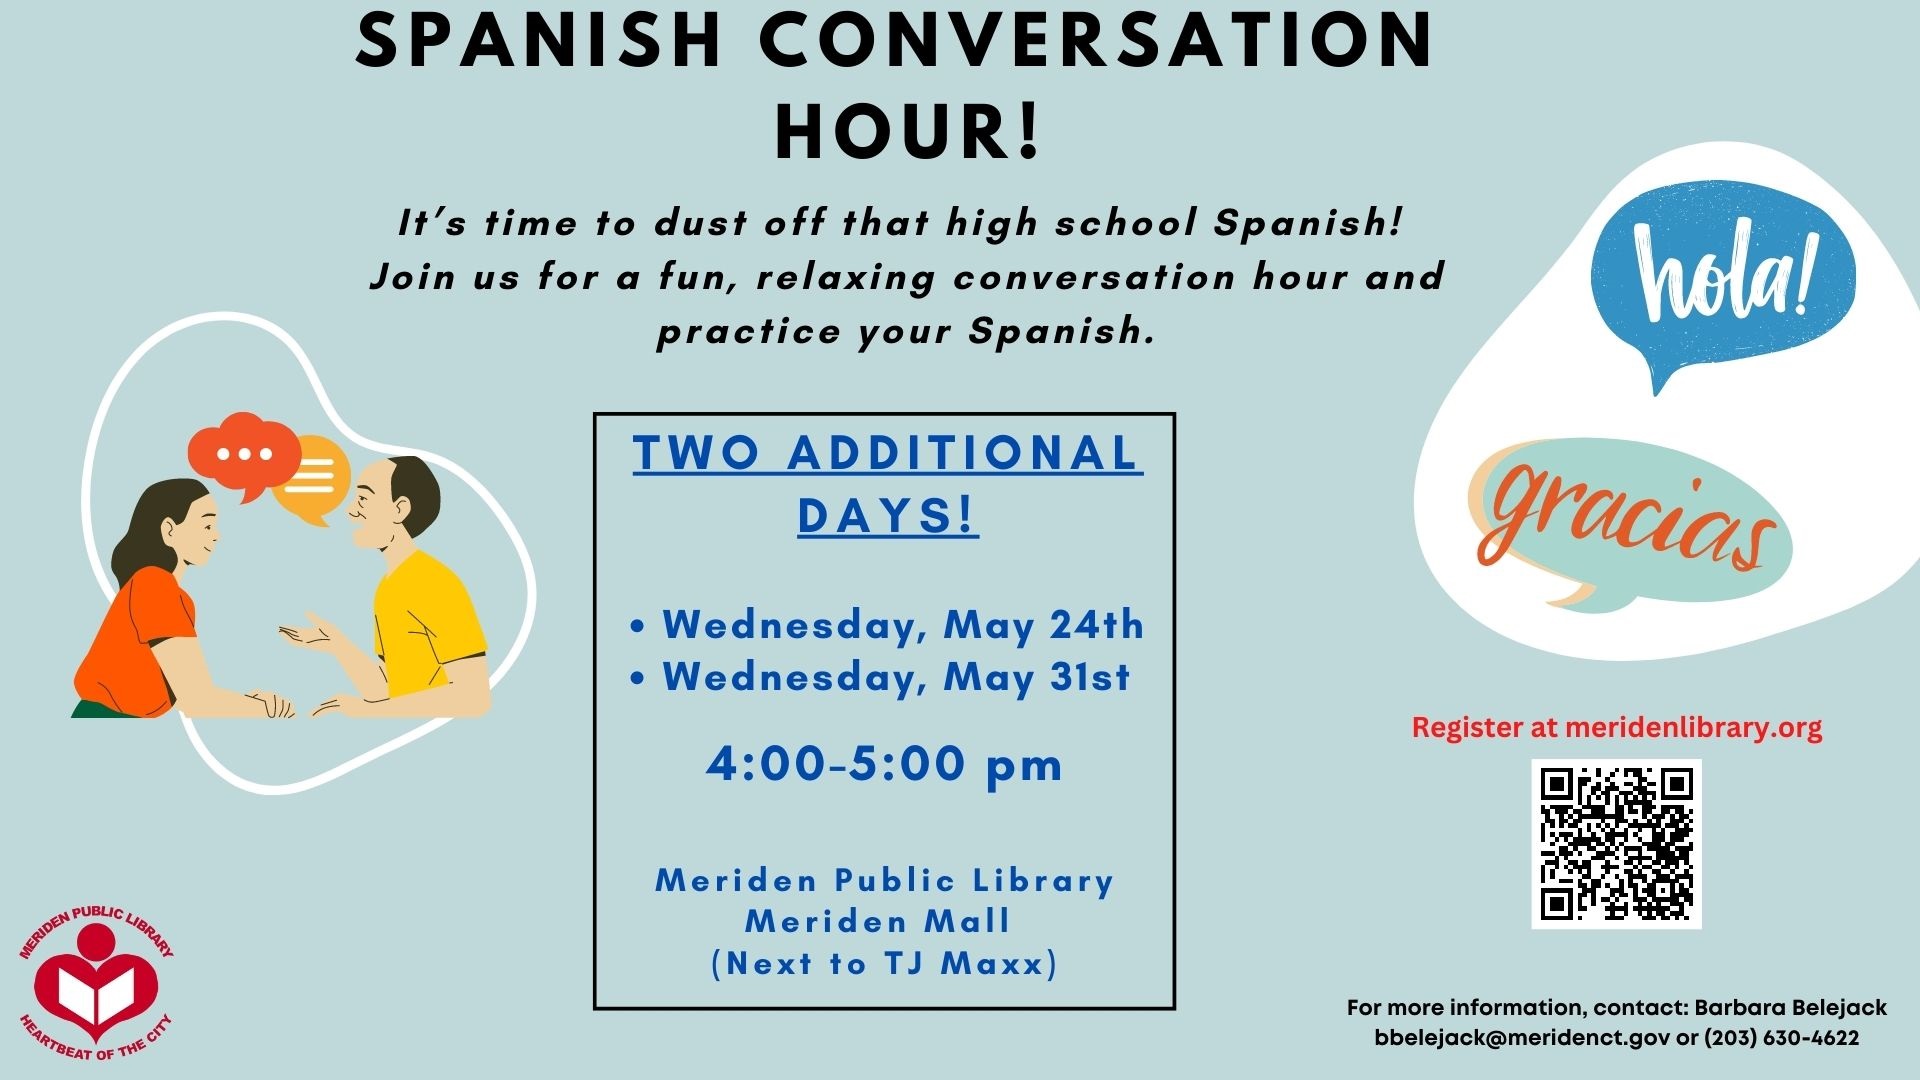 Spanish Conversation hour written in text next to two people conversing together